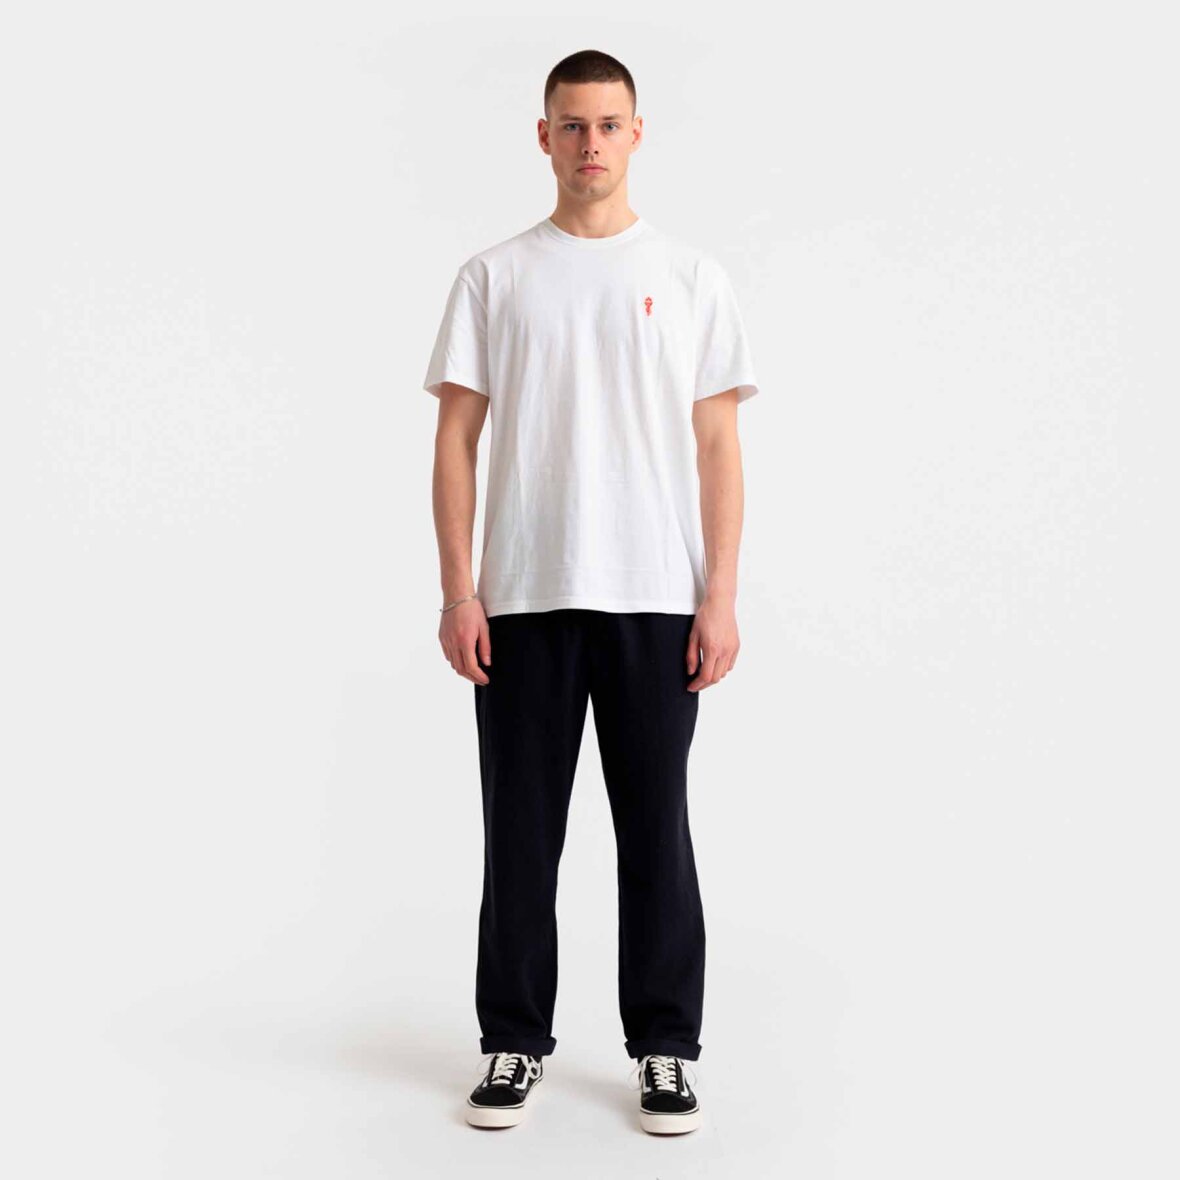 Revolution - Casual trousers